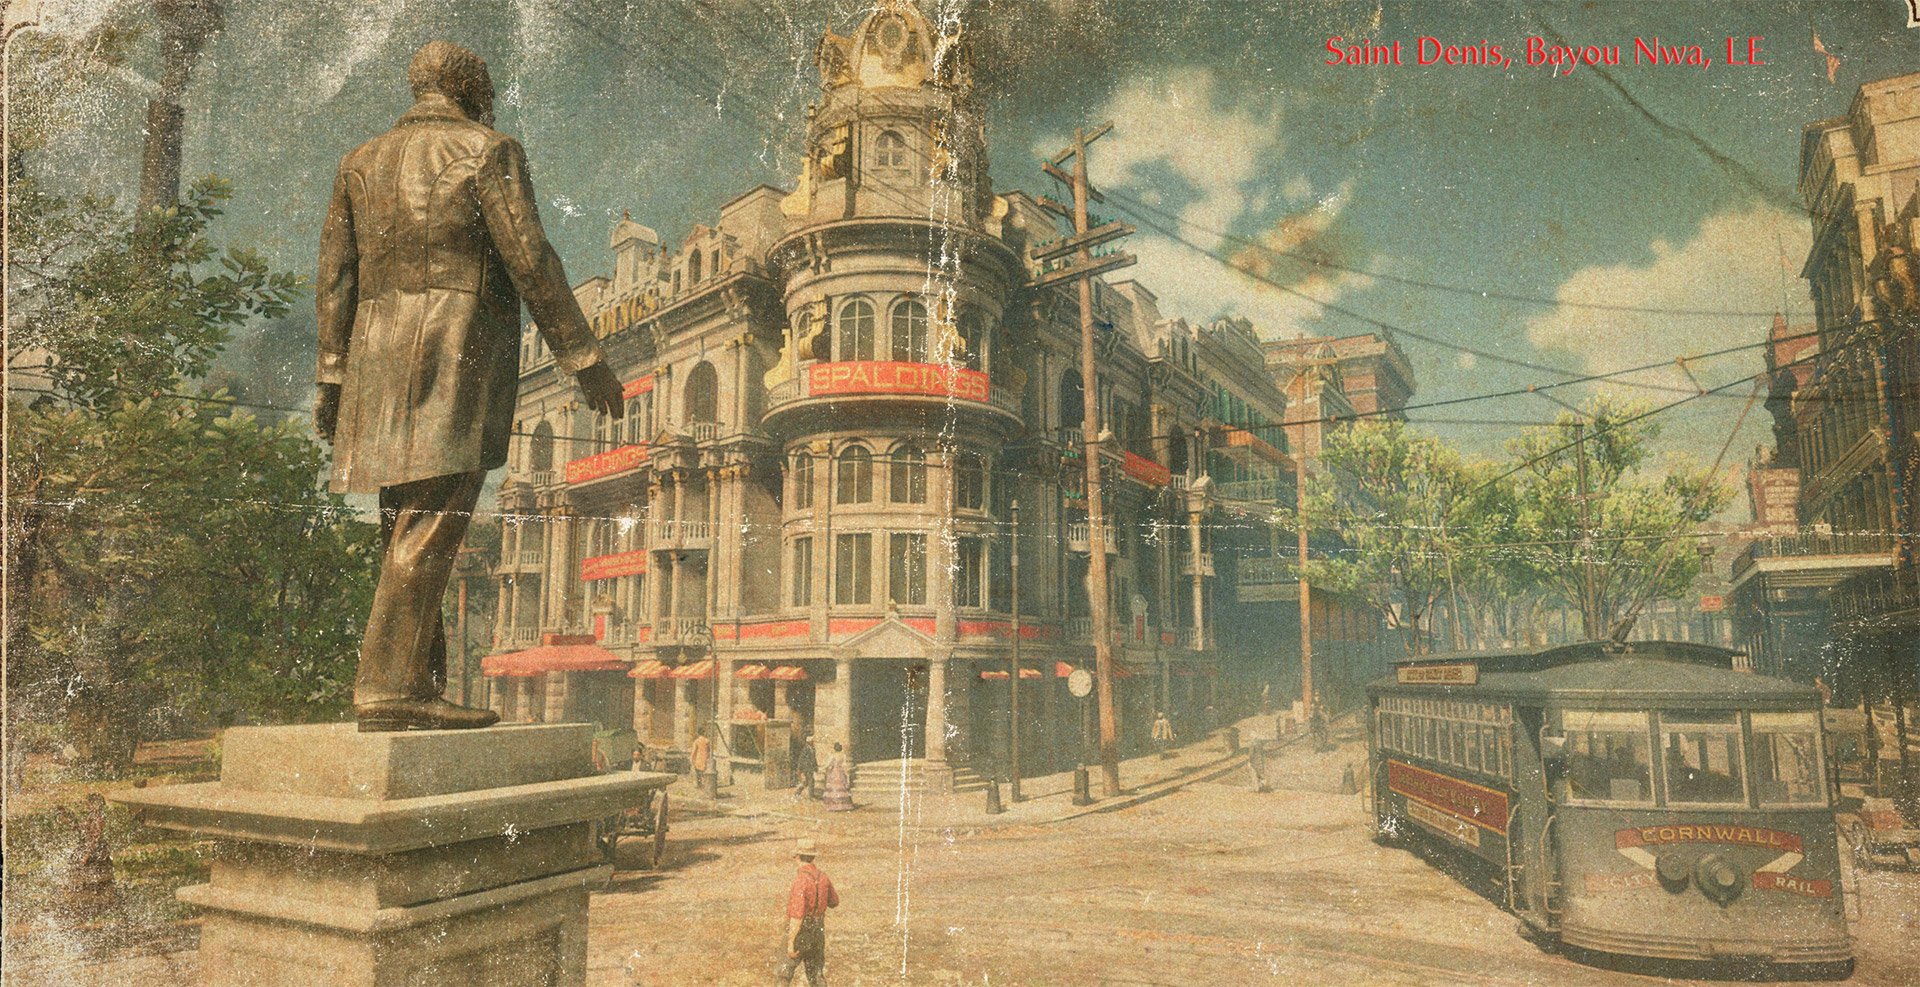 Saint Denis is the sprawling city in the south-east corner of the map. It's more industrialised than any other location and has trams, telephone lines and paddle steamers.